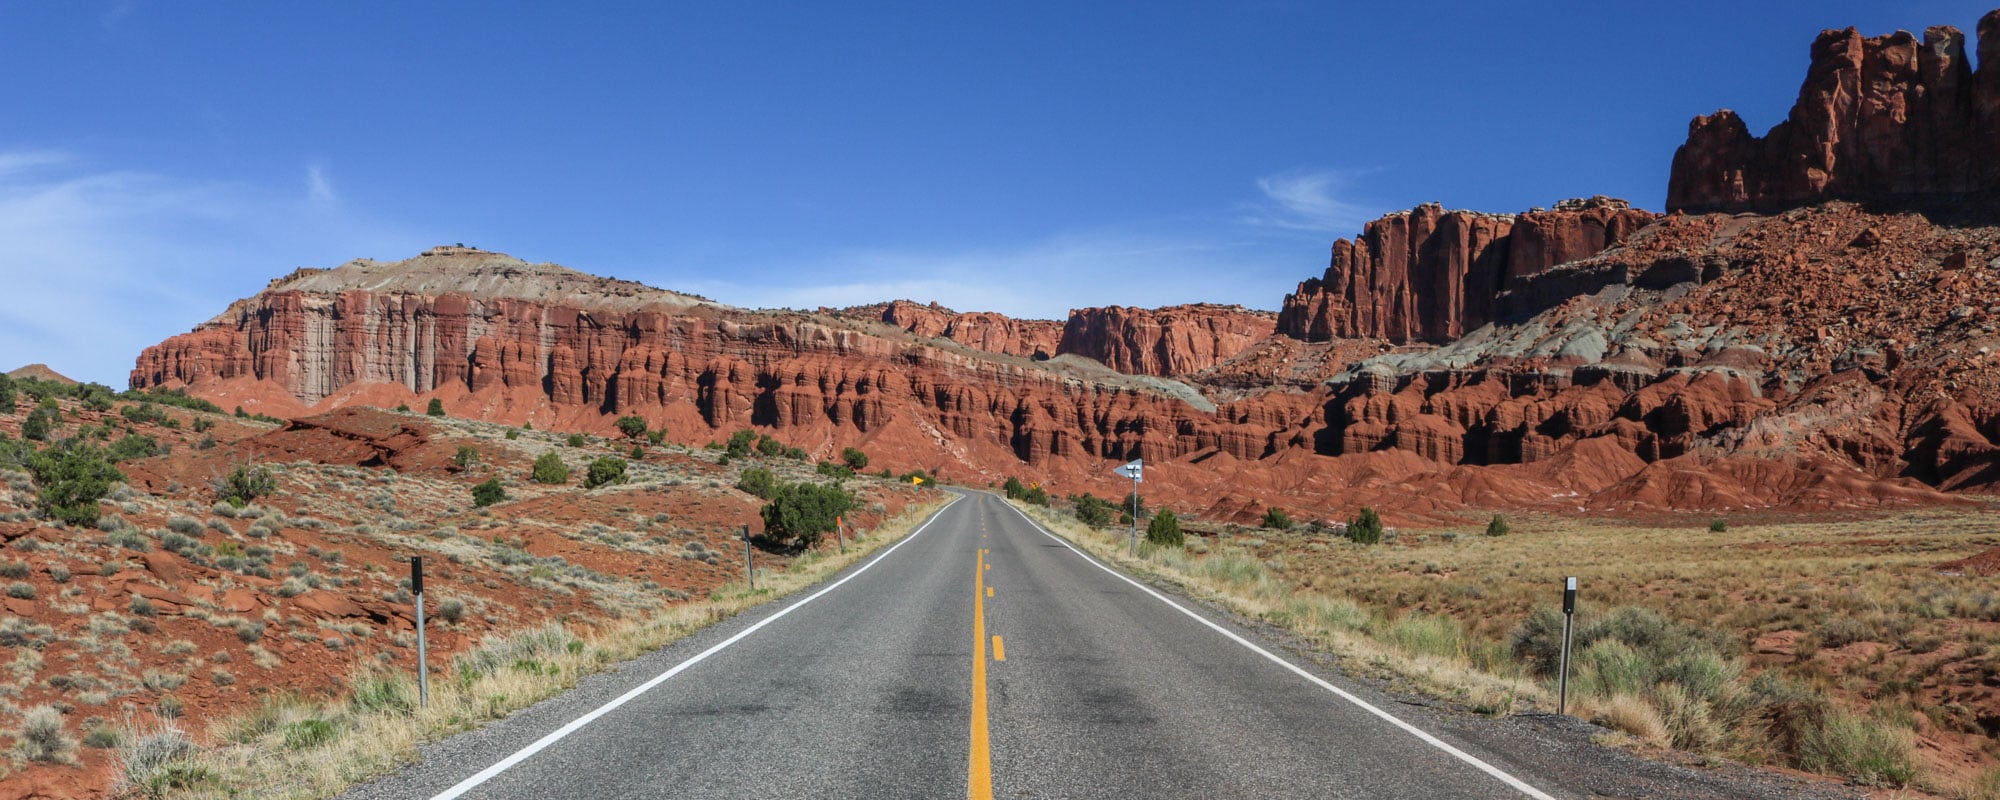 Capitol Reef National Park - Banner Highway 24